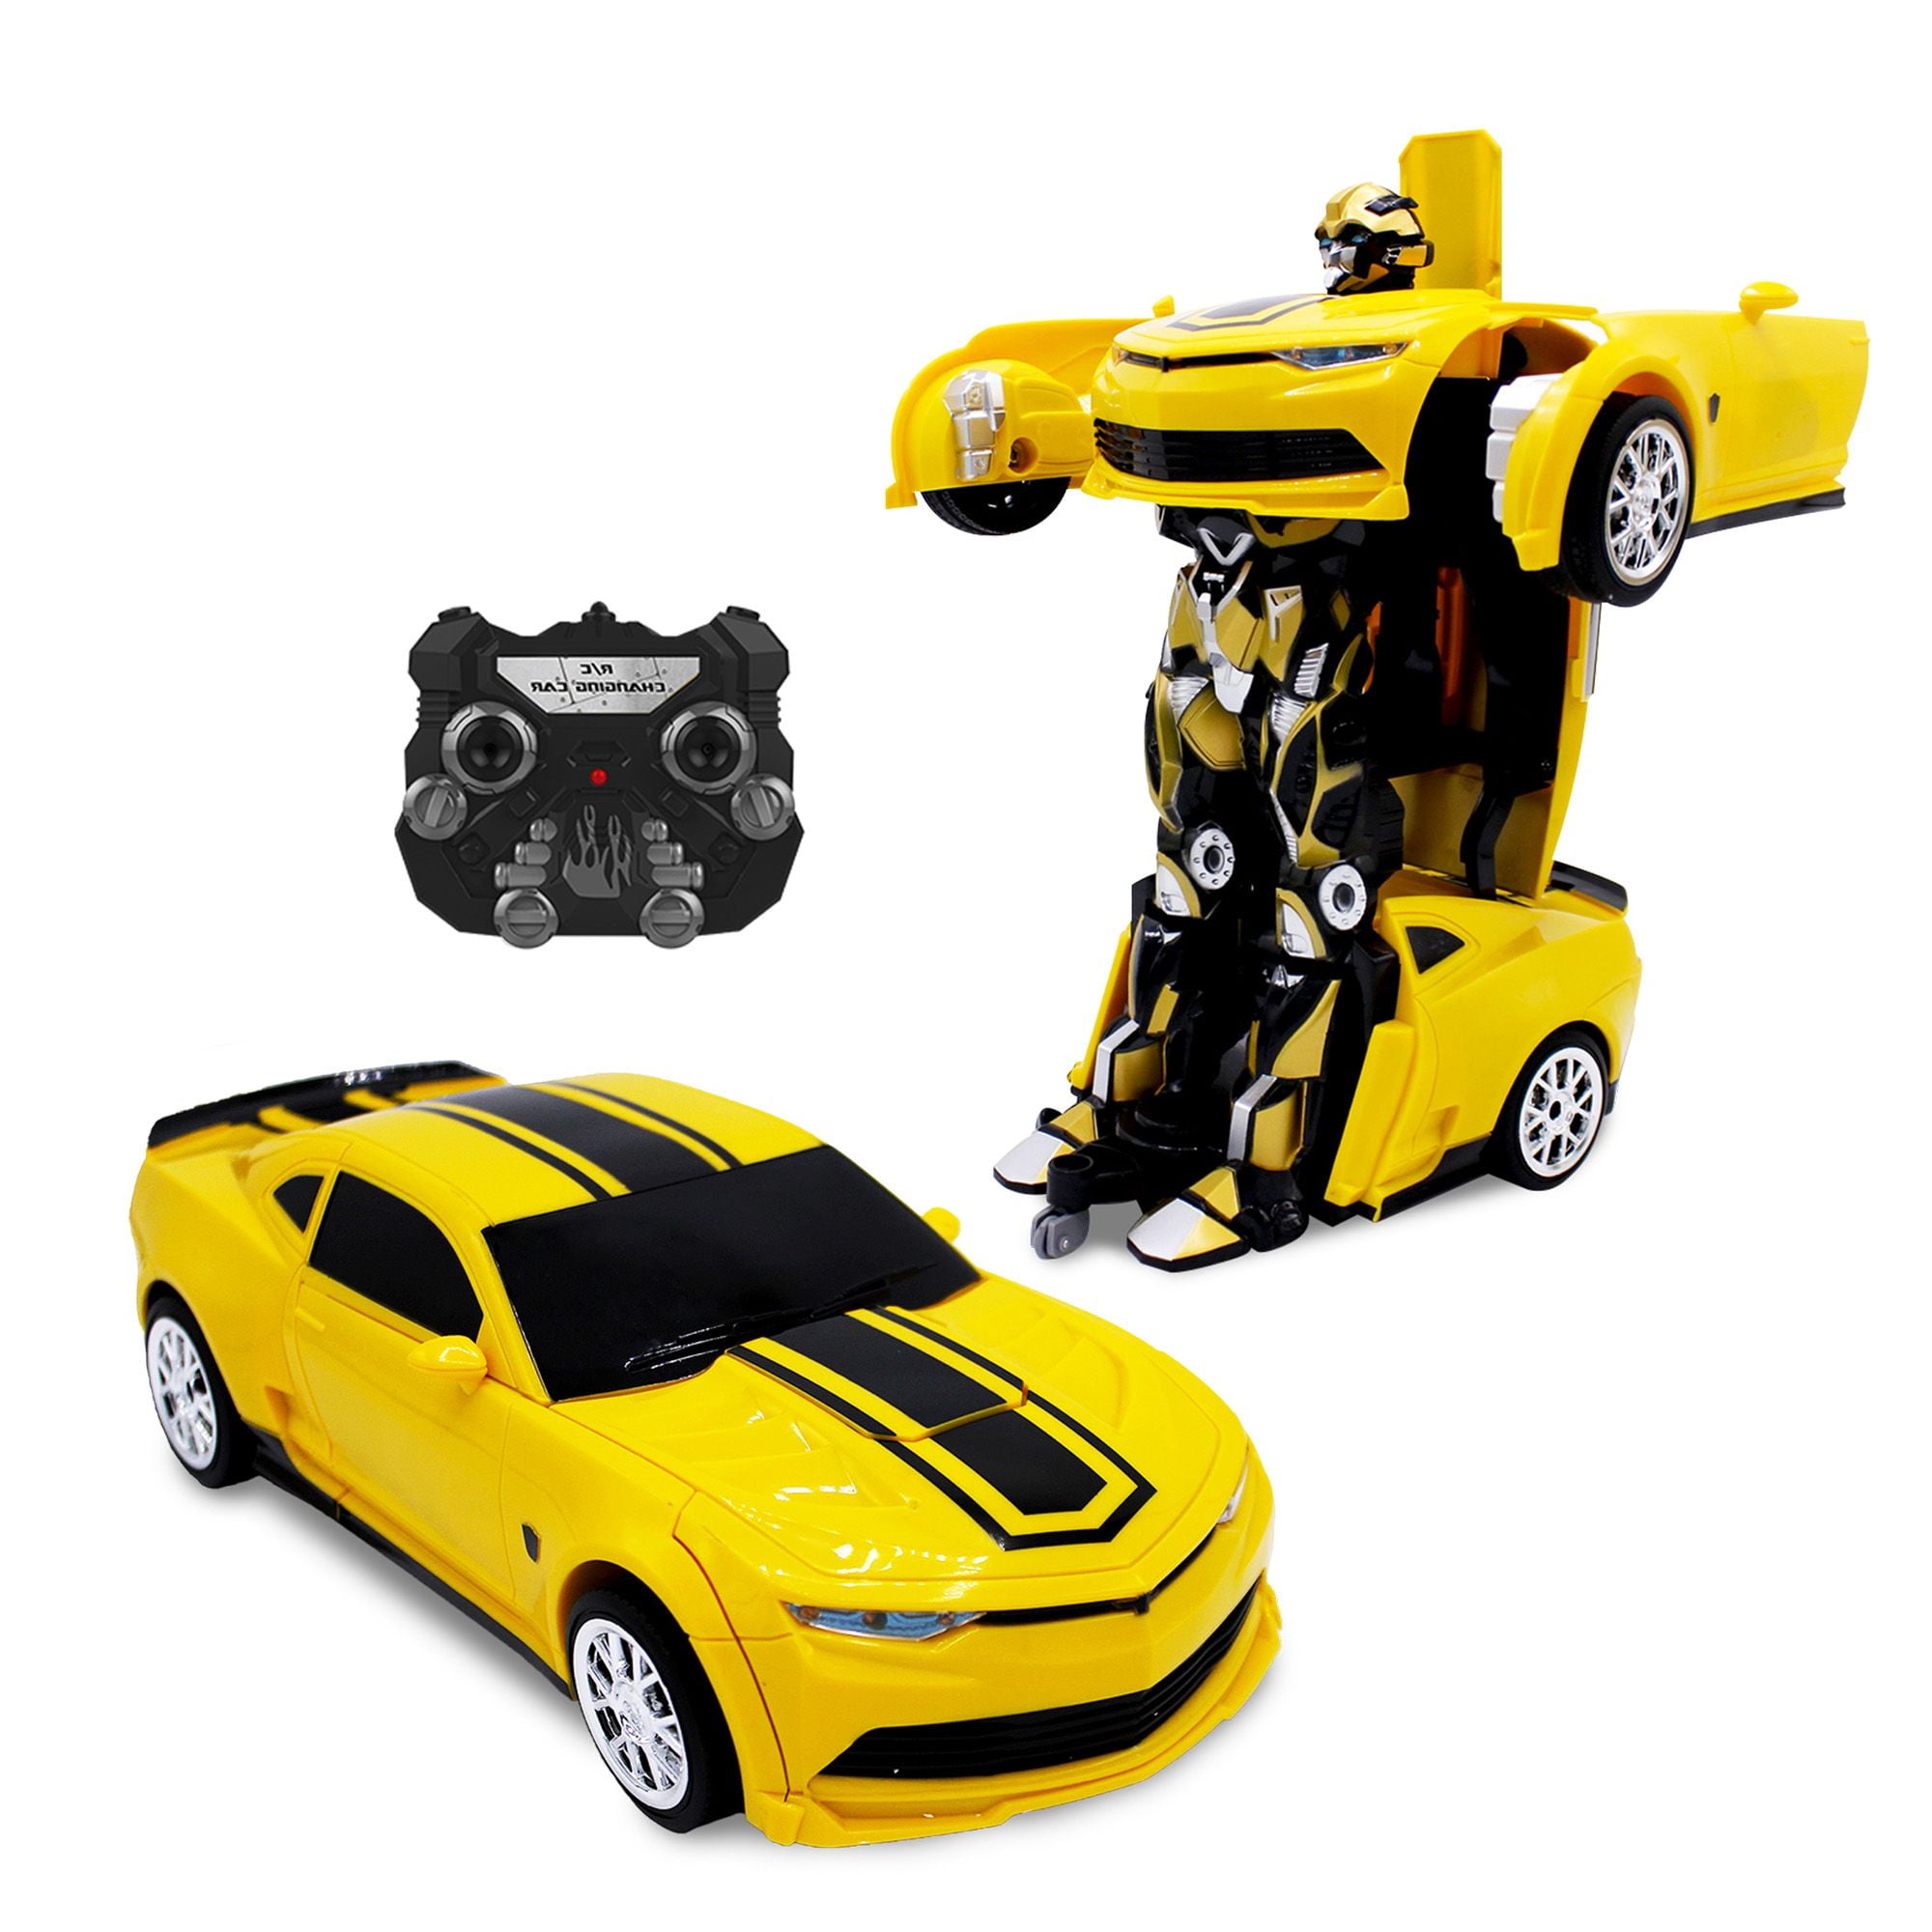 1:16 TRANSFORMERS ROBOT BUMBLEBEE ELECTRIC RC RADIO REMOTE CONTROL CAR KIDS TOY 